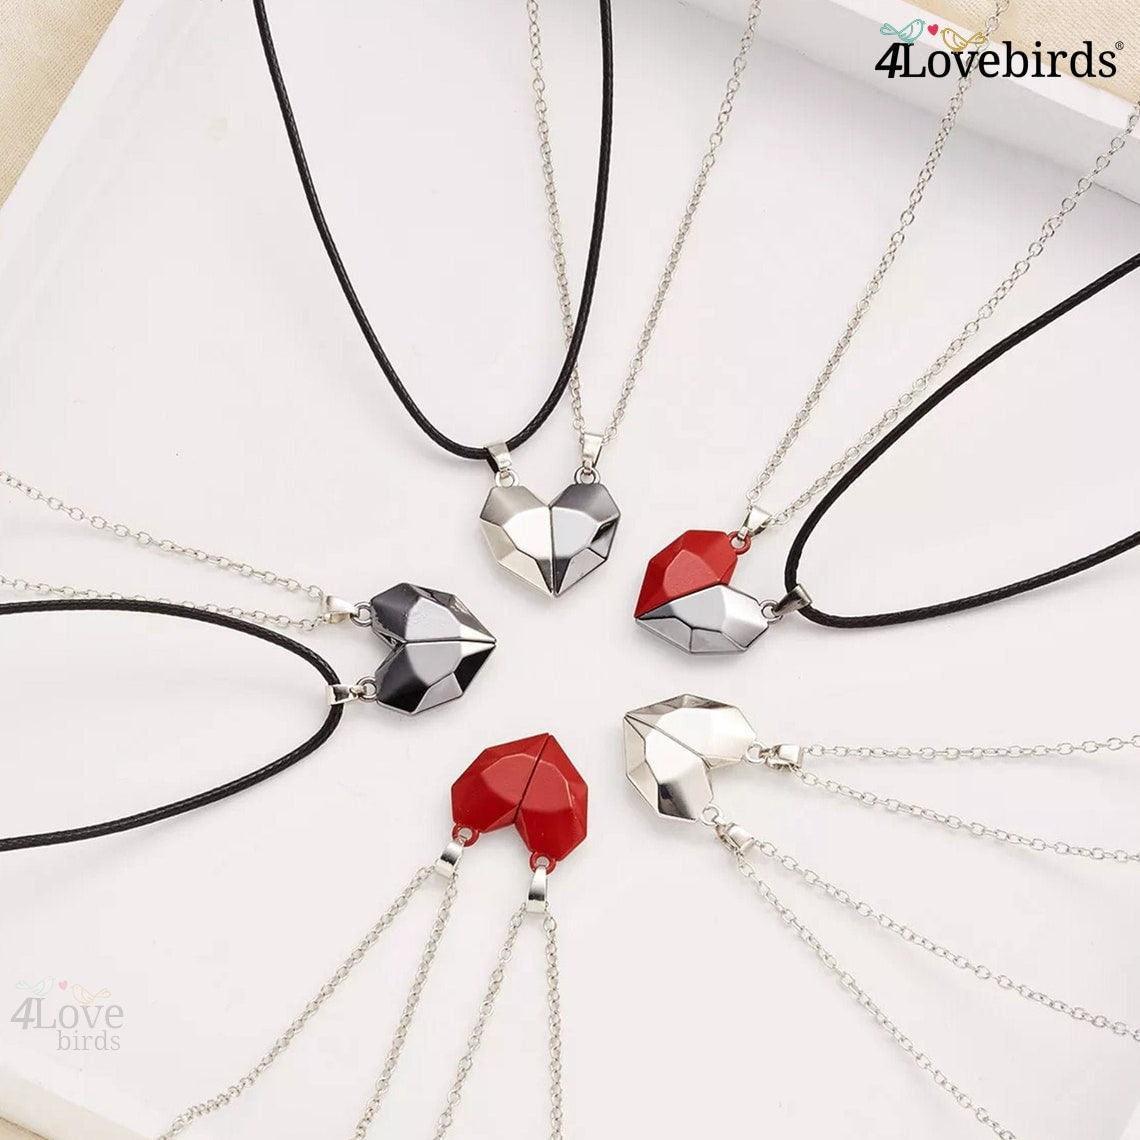 Forever Two Pieces Couple Necklace Set Magnetic Heart Pendant for